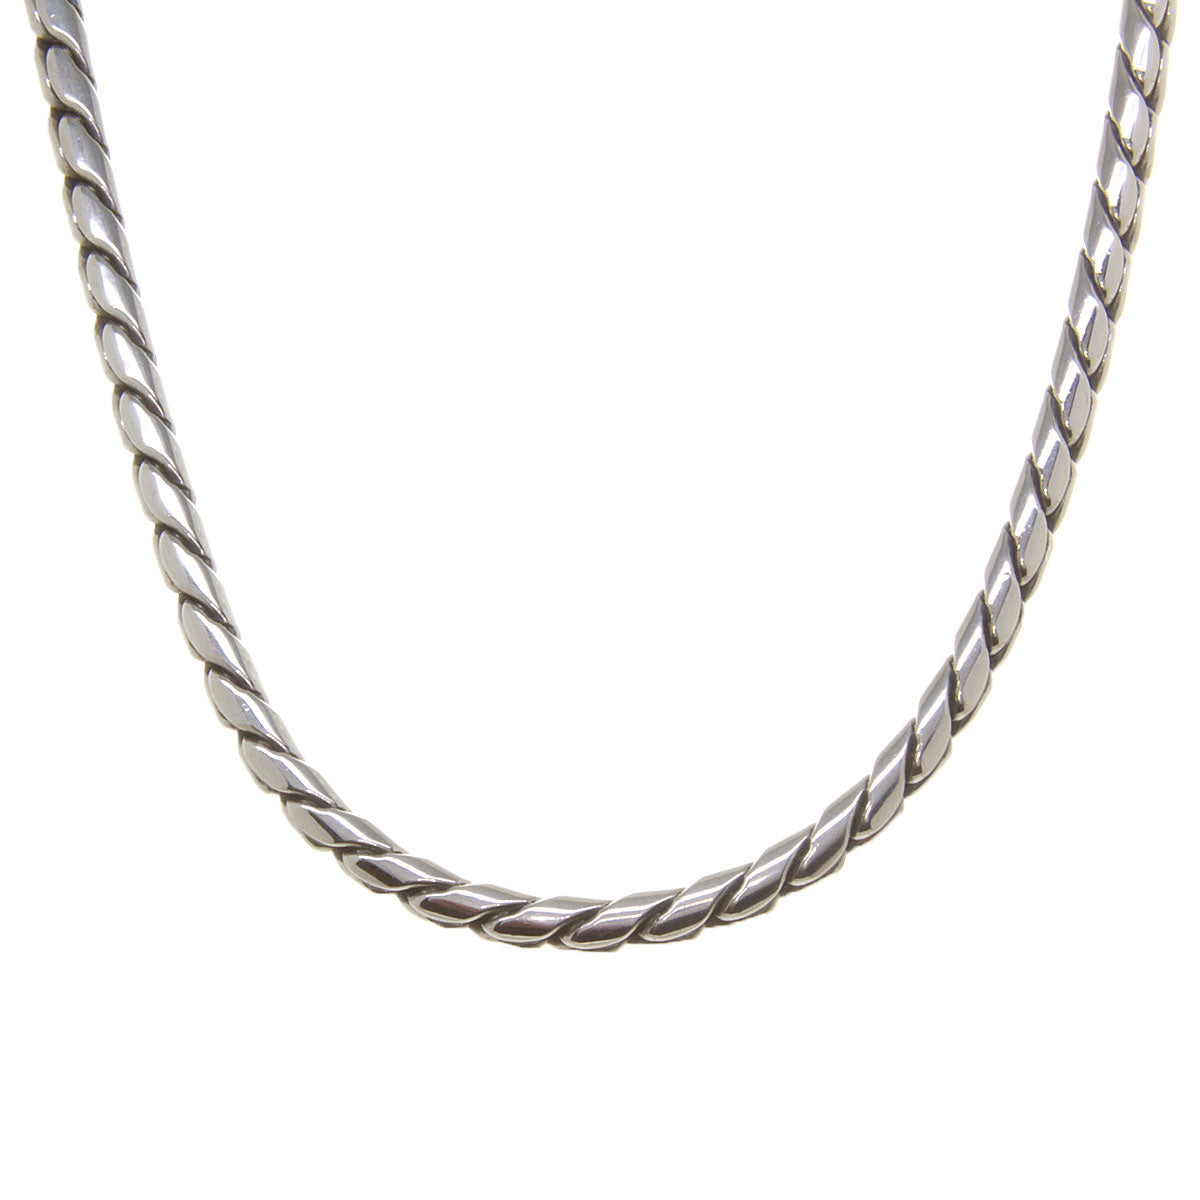 Rancho Trading Company. HC011B: Cobra Chain in Gold or Silver